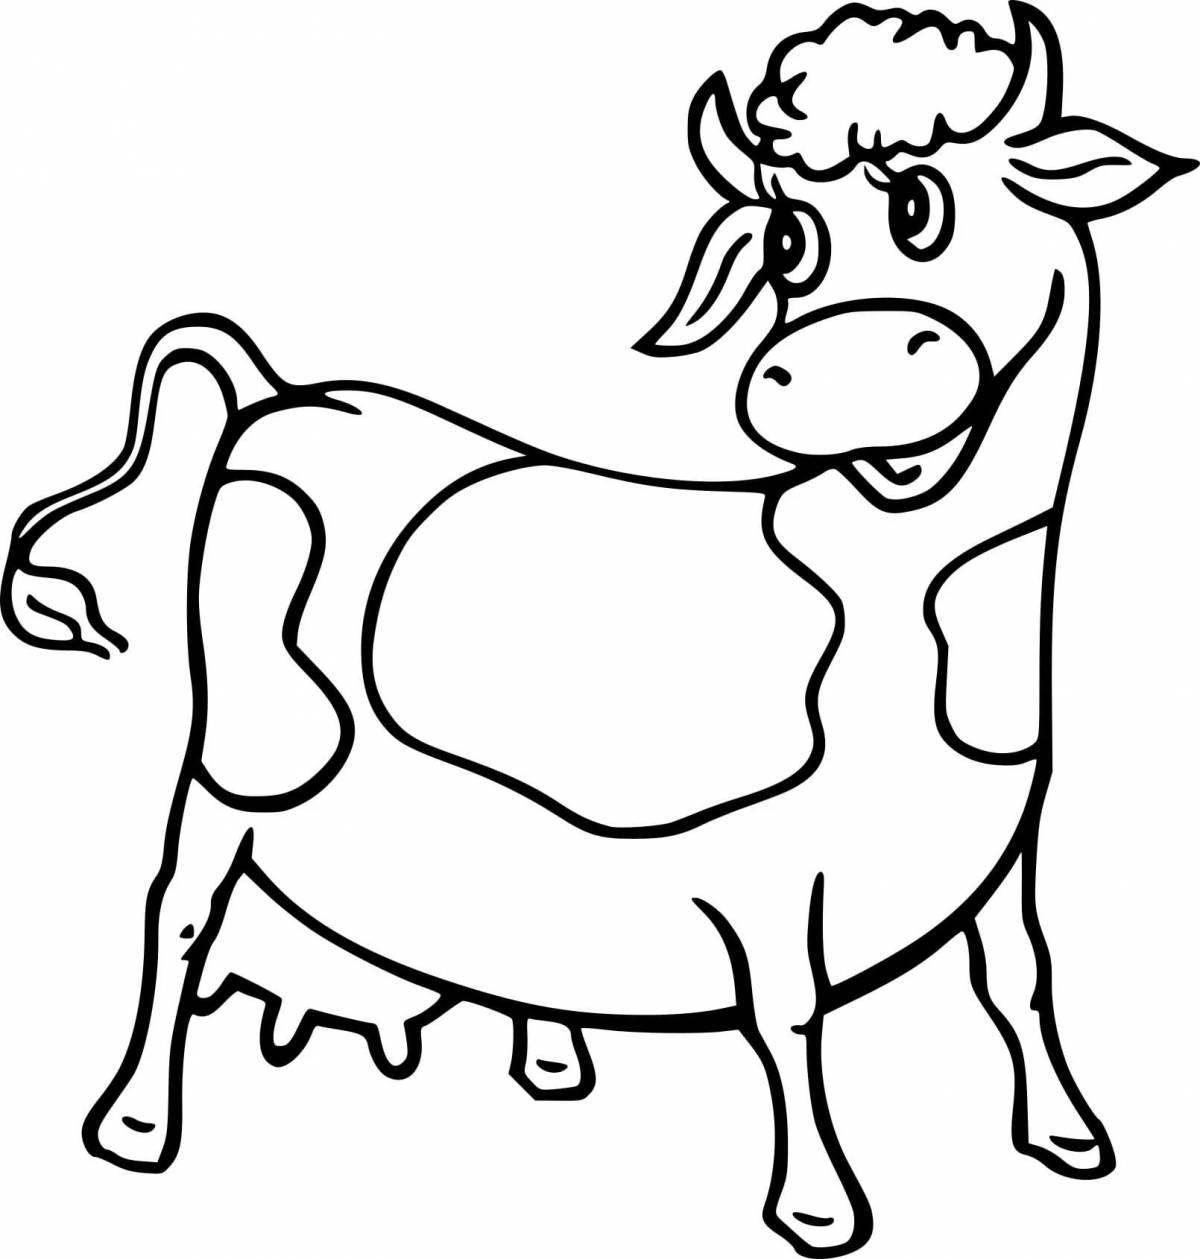 Majestic drawing of a cow